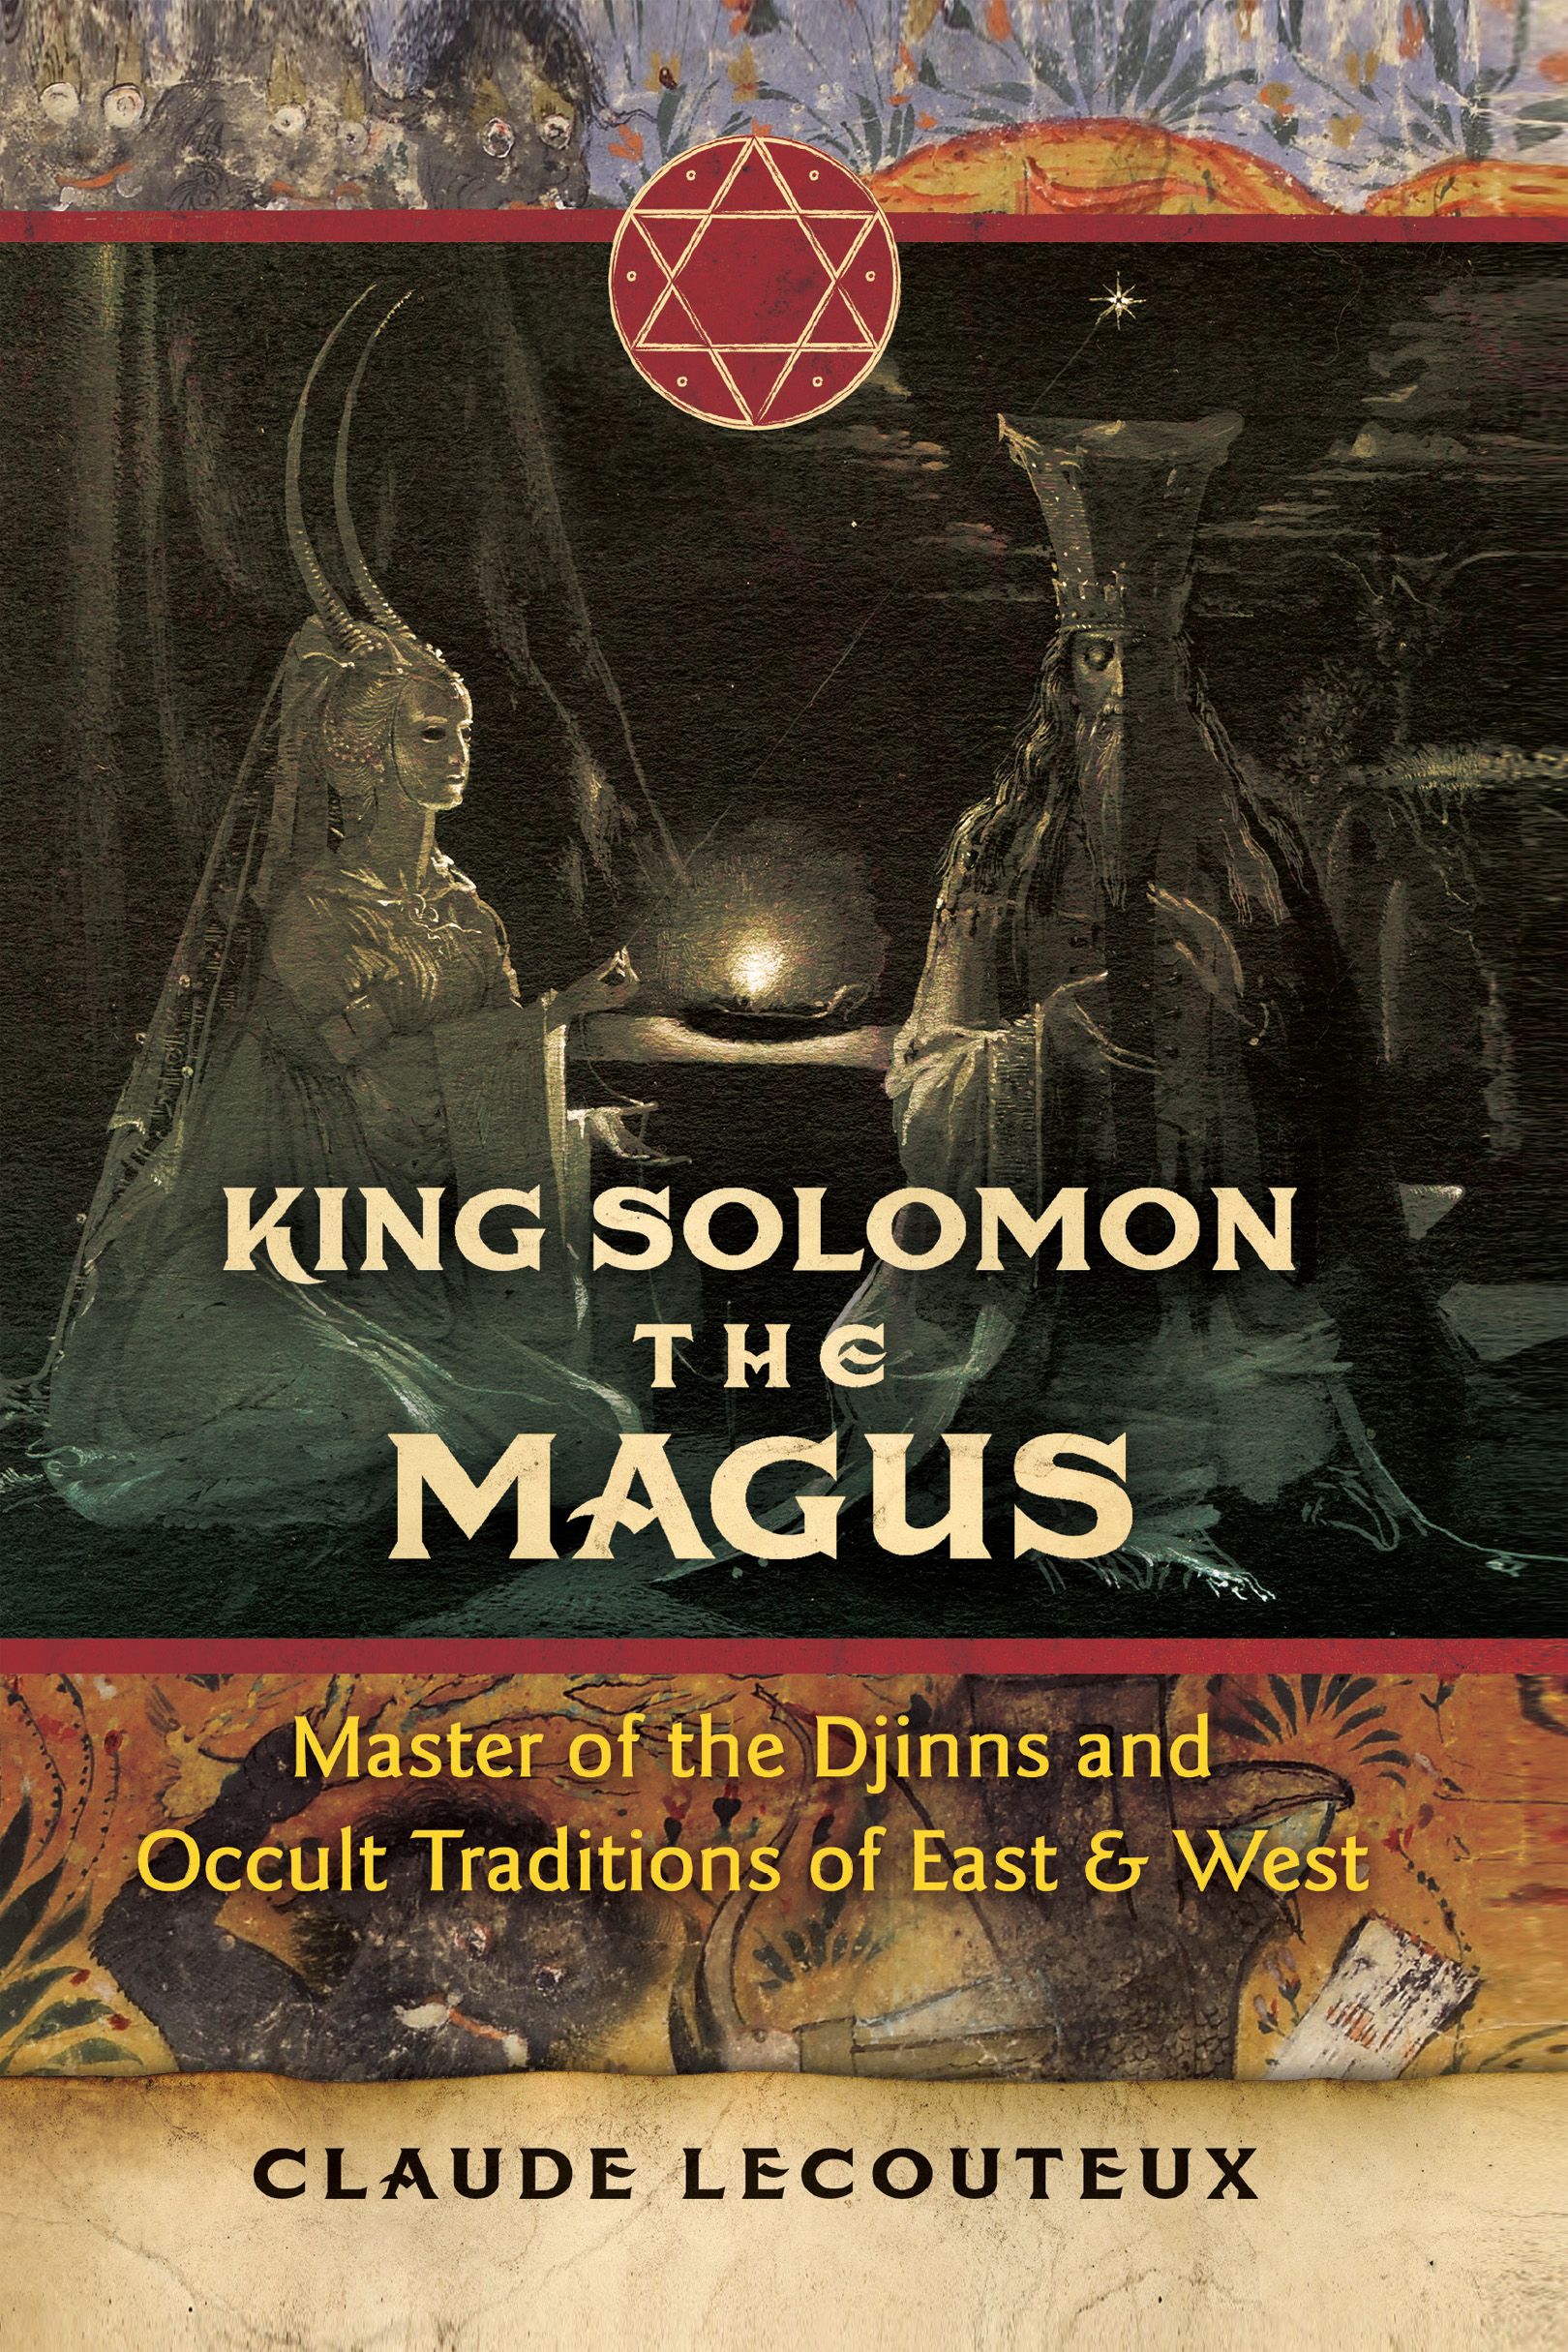 King Solomon the Magus Master of the Djinns and Occult Traditions of East and West - image 1